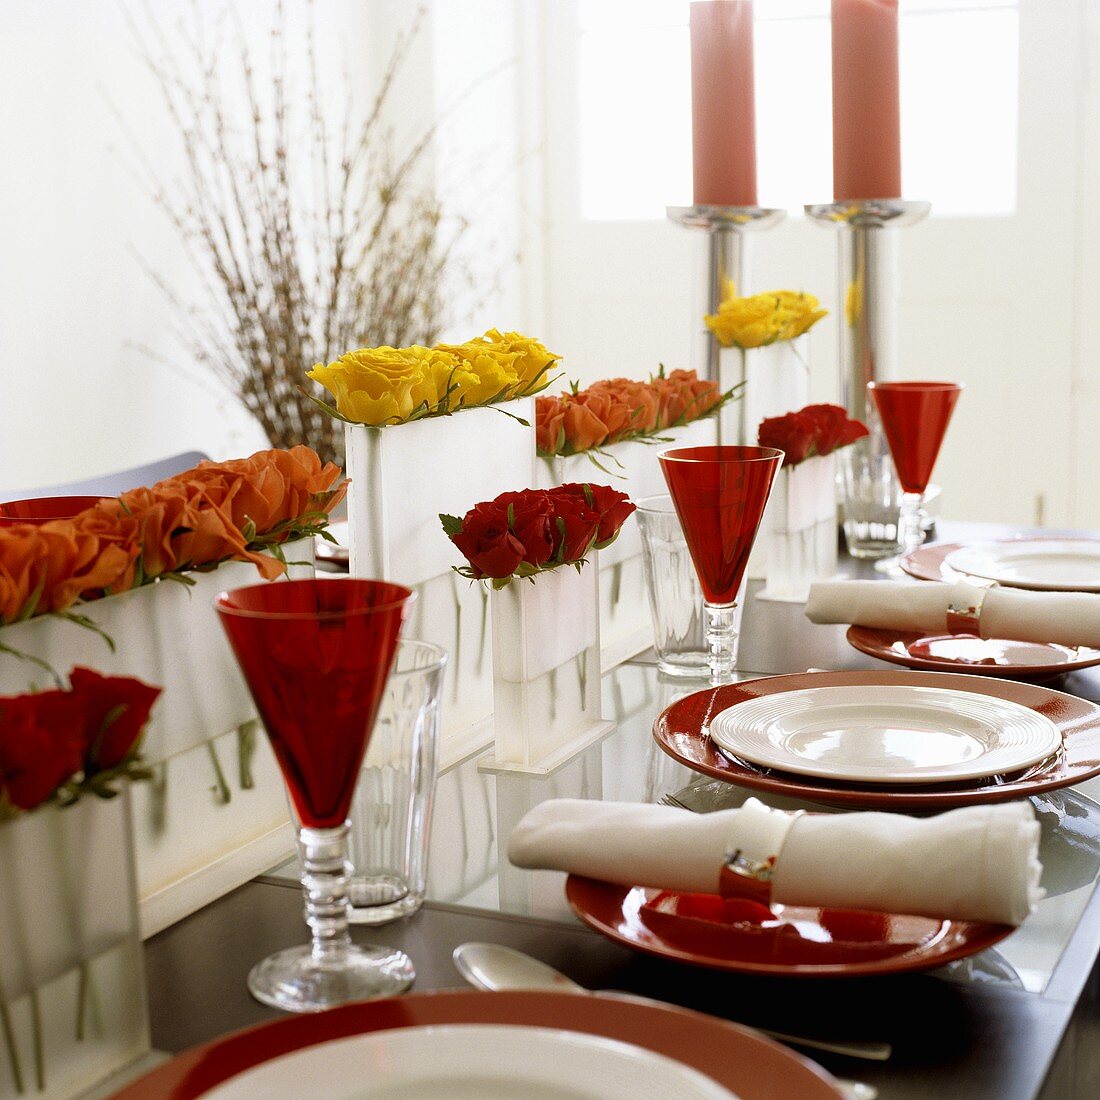 A laid table - red and white place settings with coloured stem glasses and roses in vases